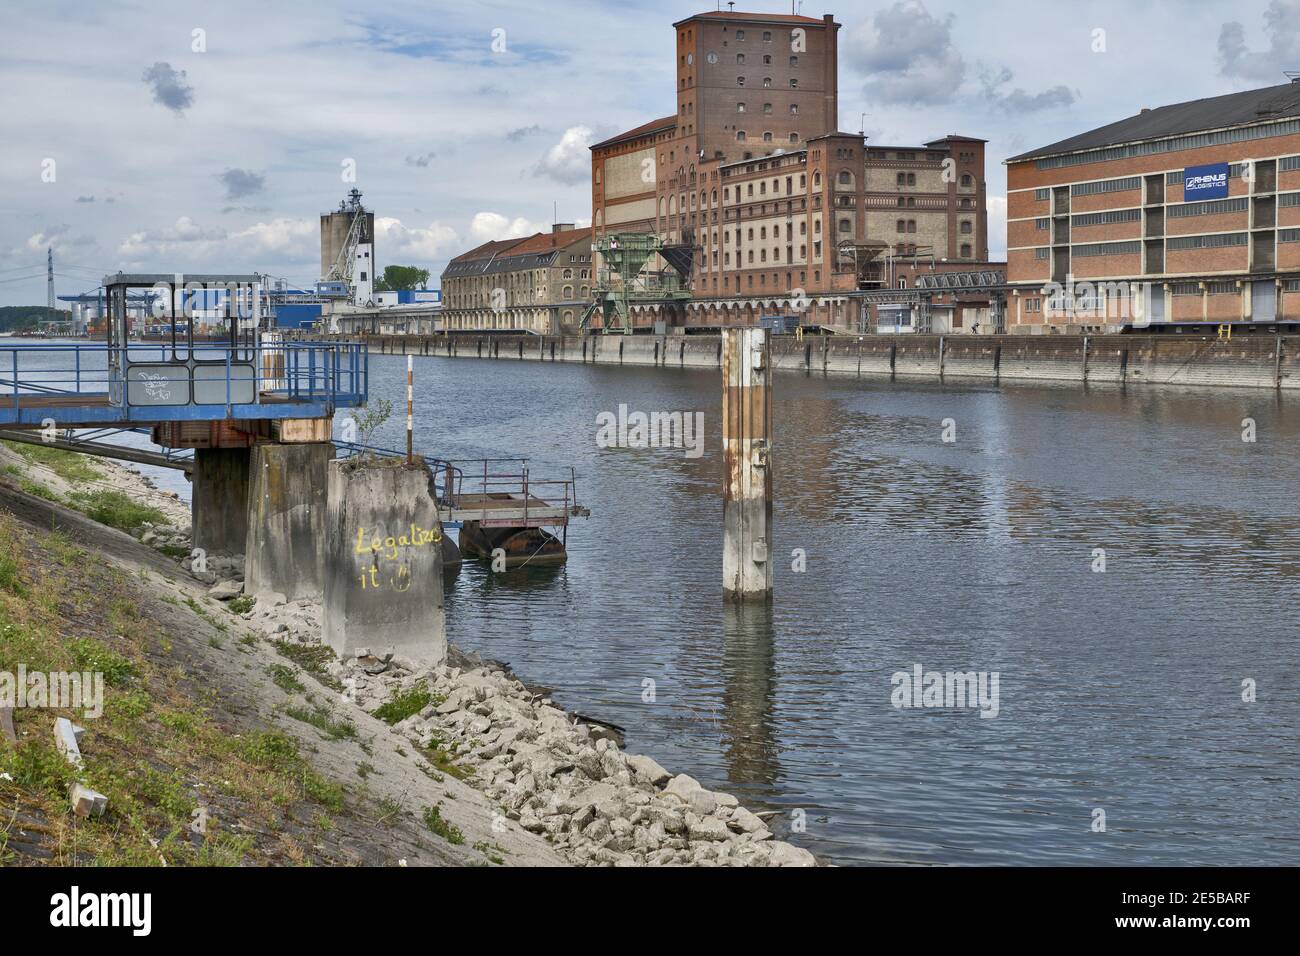 Karlsruhe, Germany: port of Karlsruhe with river rhine, ships, cranes and storage buildings Stock Photo